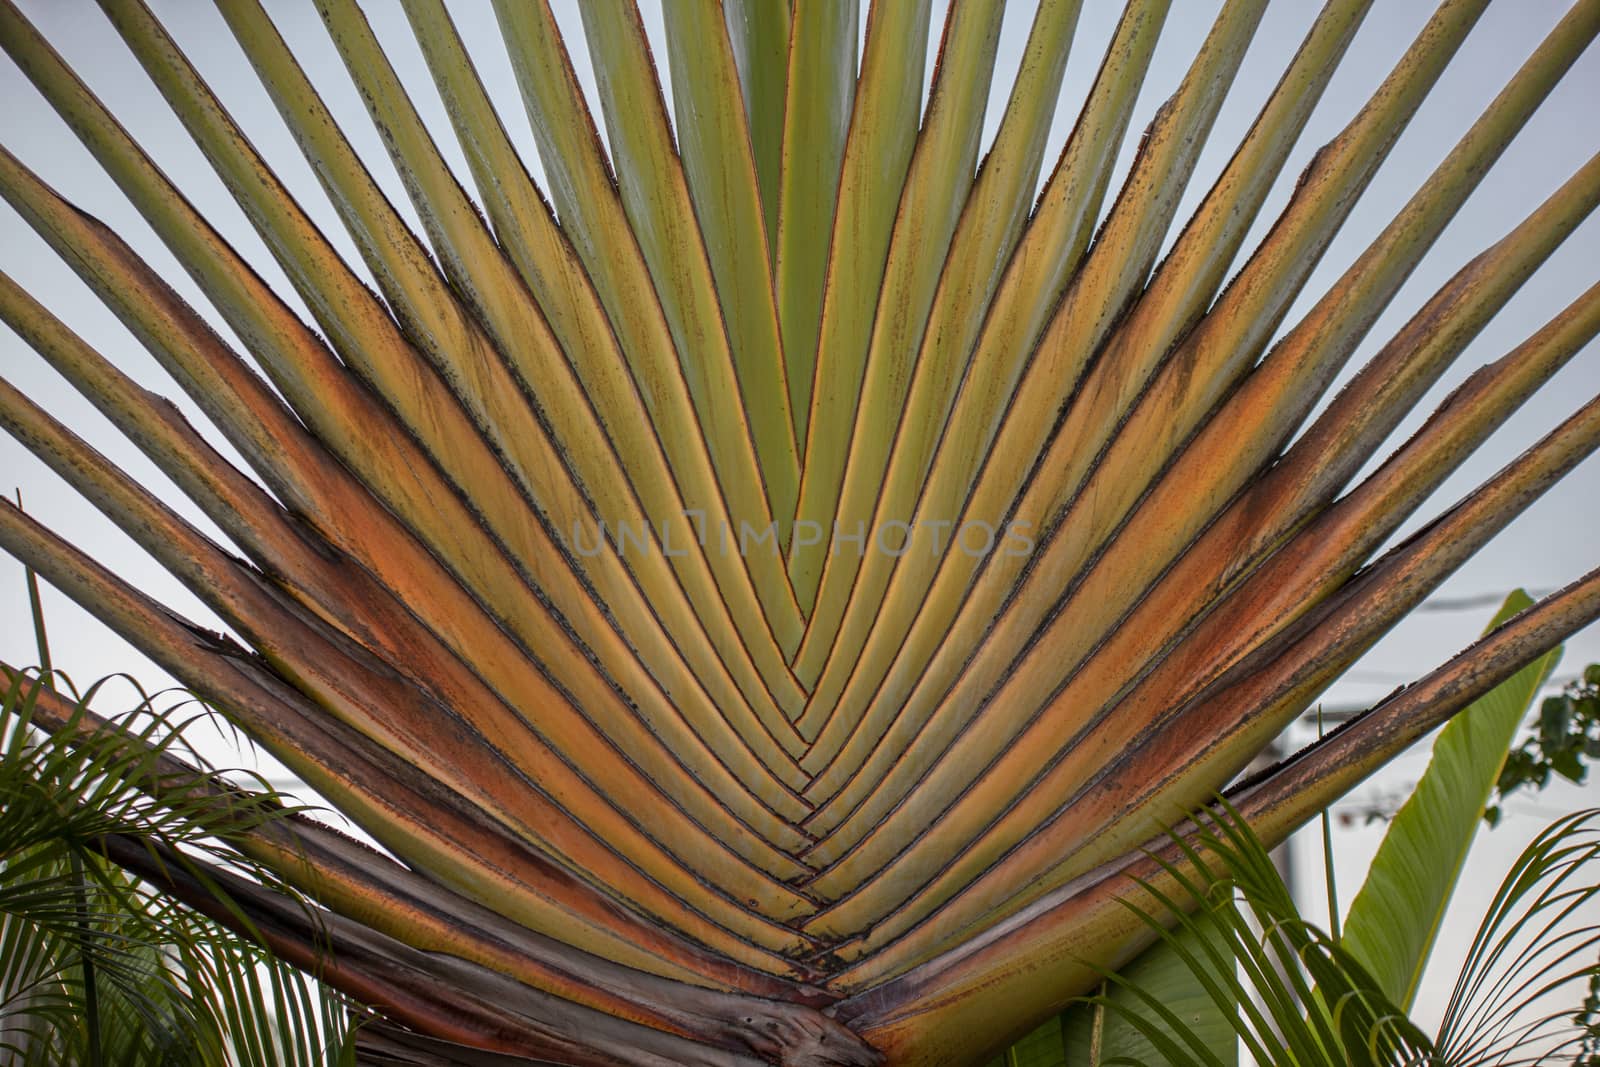 Particular palm detail in Dominican Republic at sunset